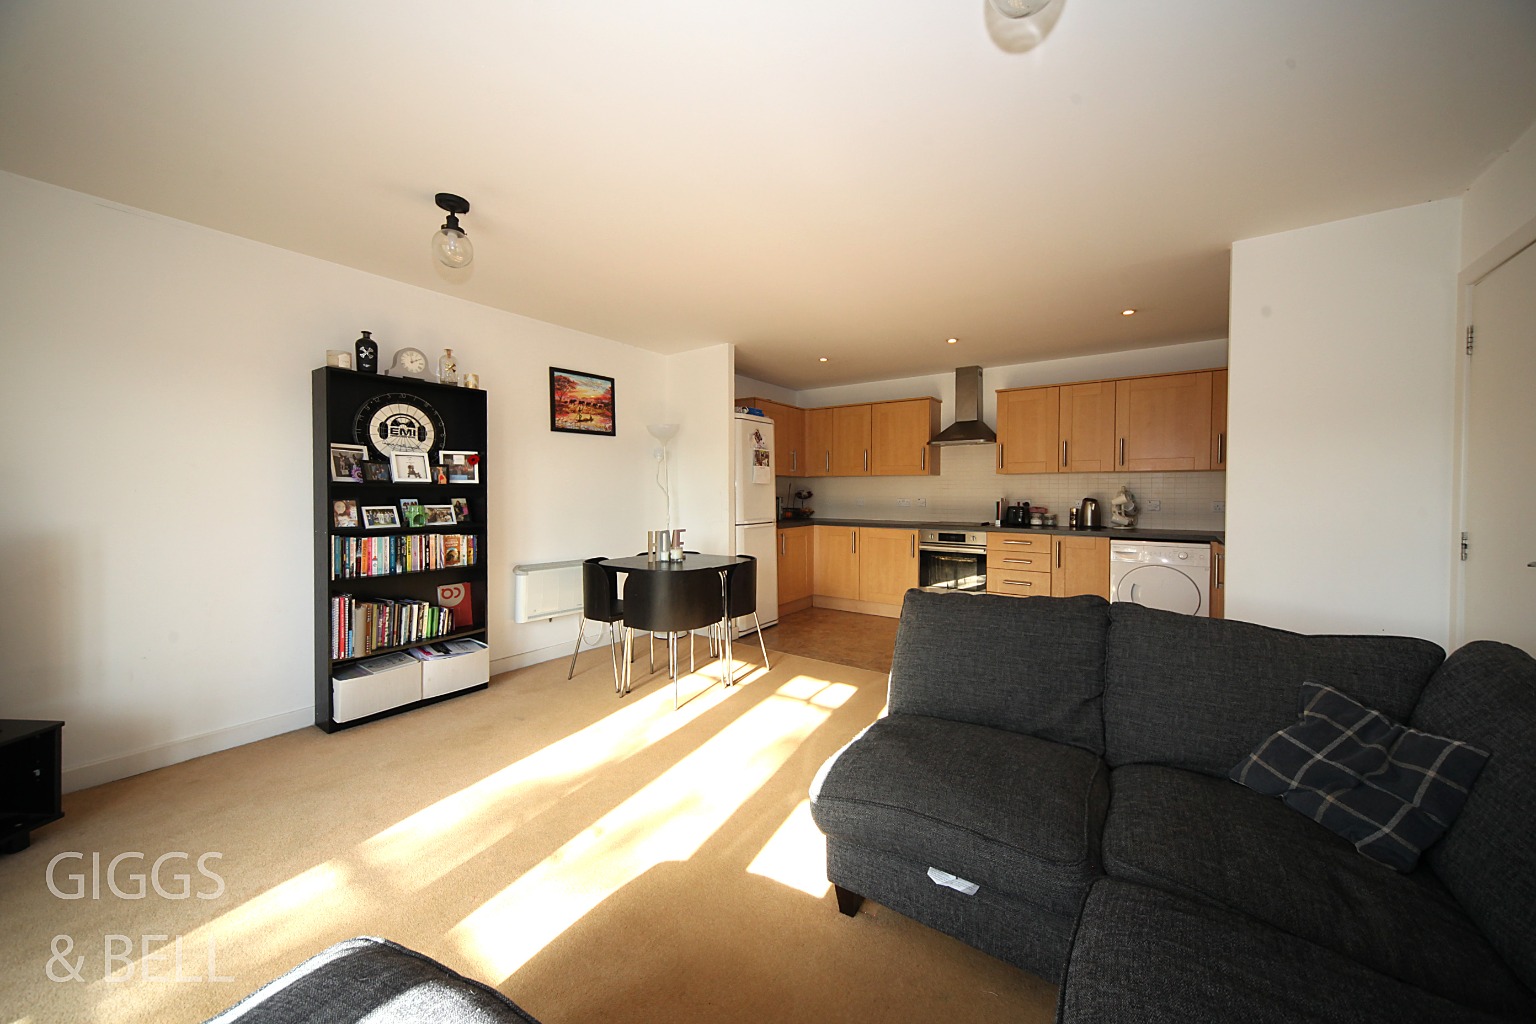 2 bed flat for sale in Holly Street, Luton - Property Image 1